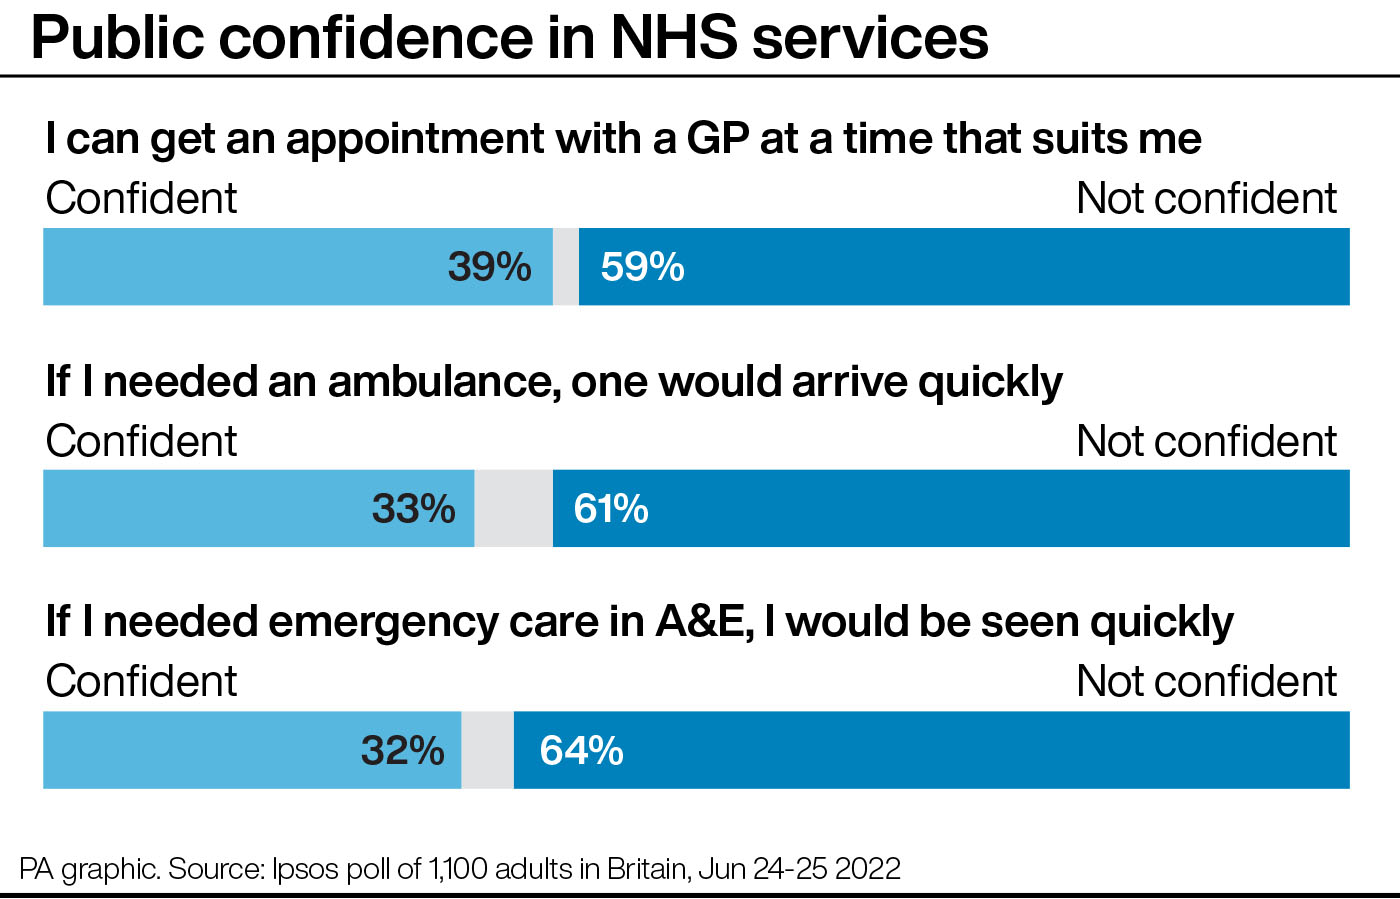 Ipsos poll of 1,100 GB adults on the NHS